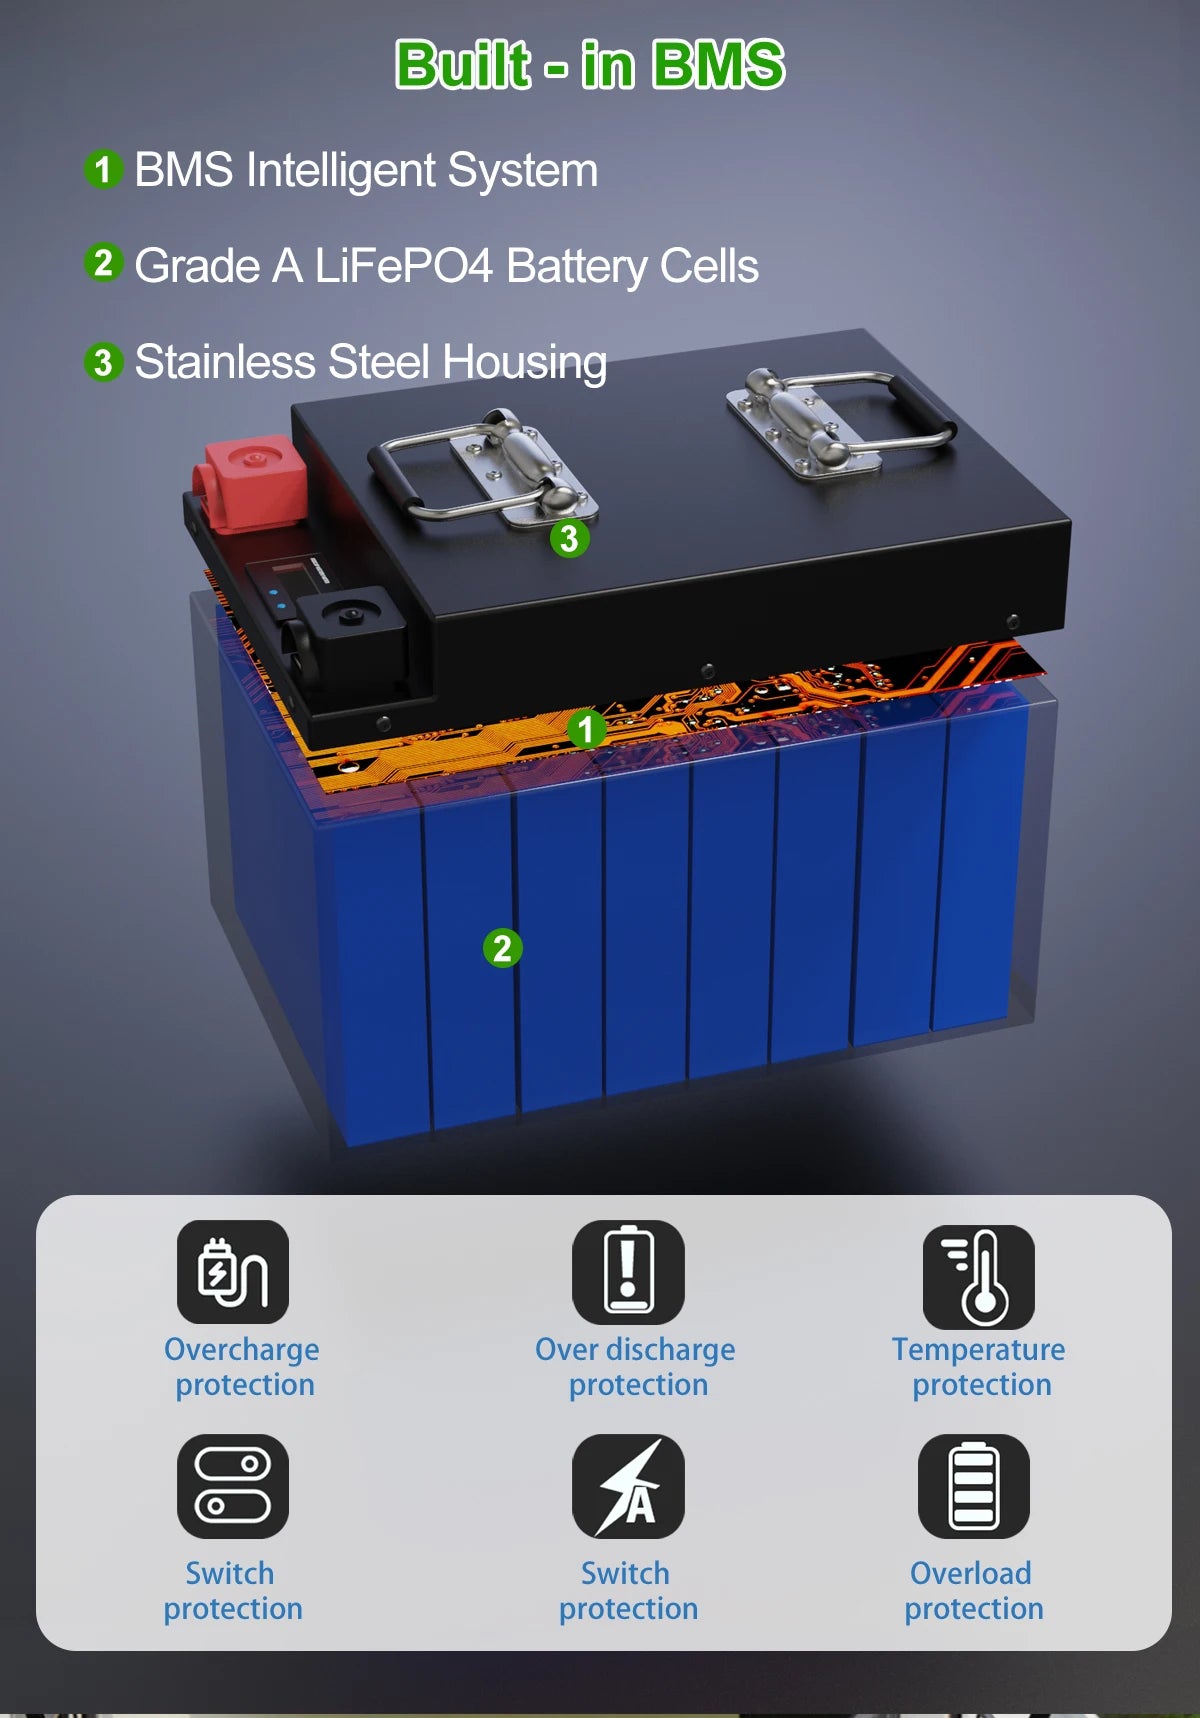 24V 200AH LiFePO4 Battery, Intelligent battery management system ensures safe and reliable operation with multiple protection features.